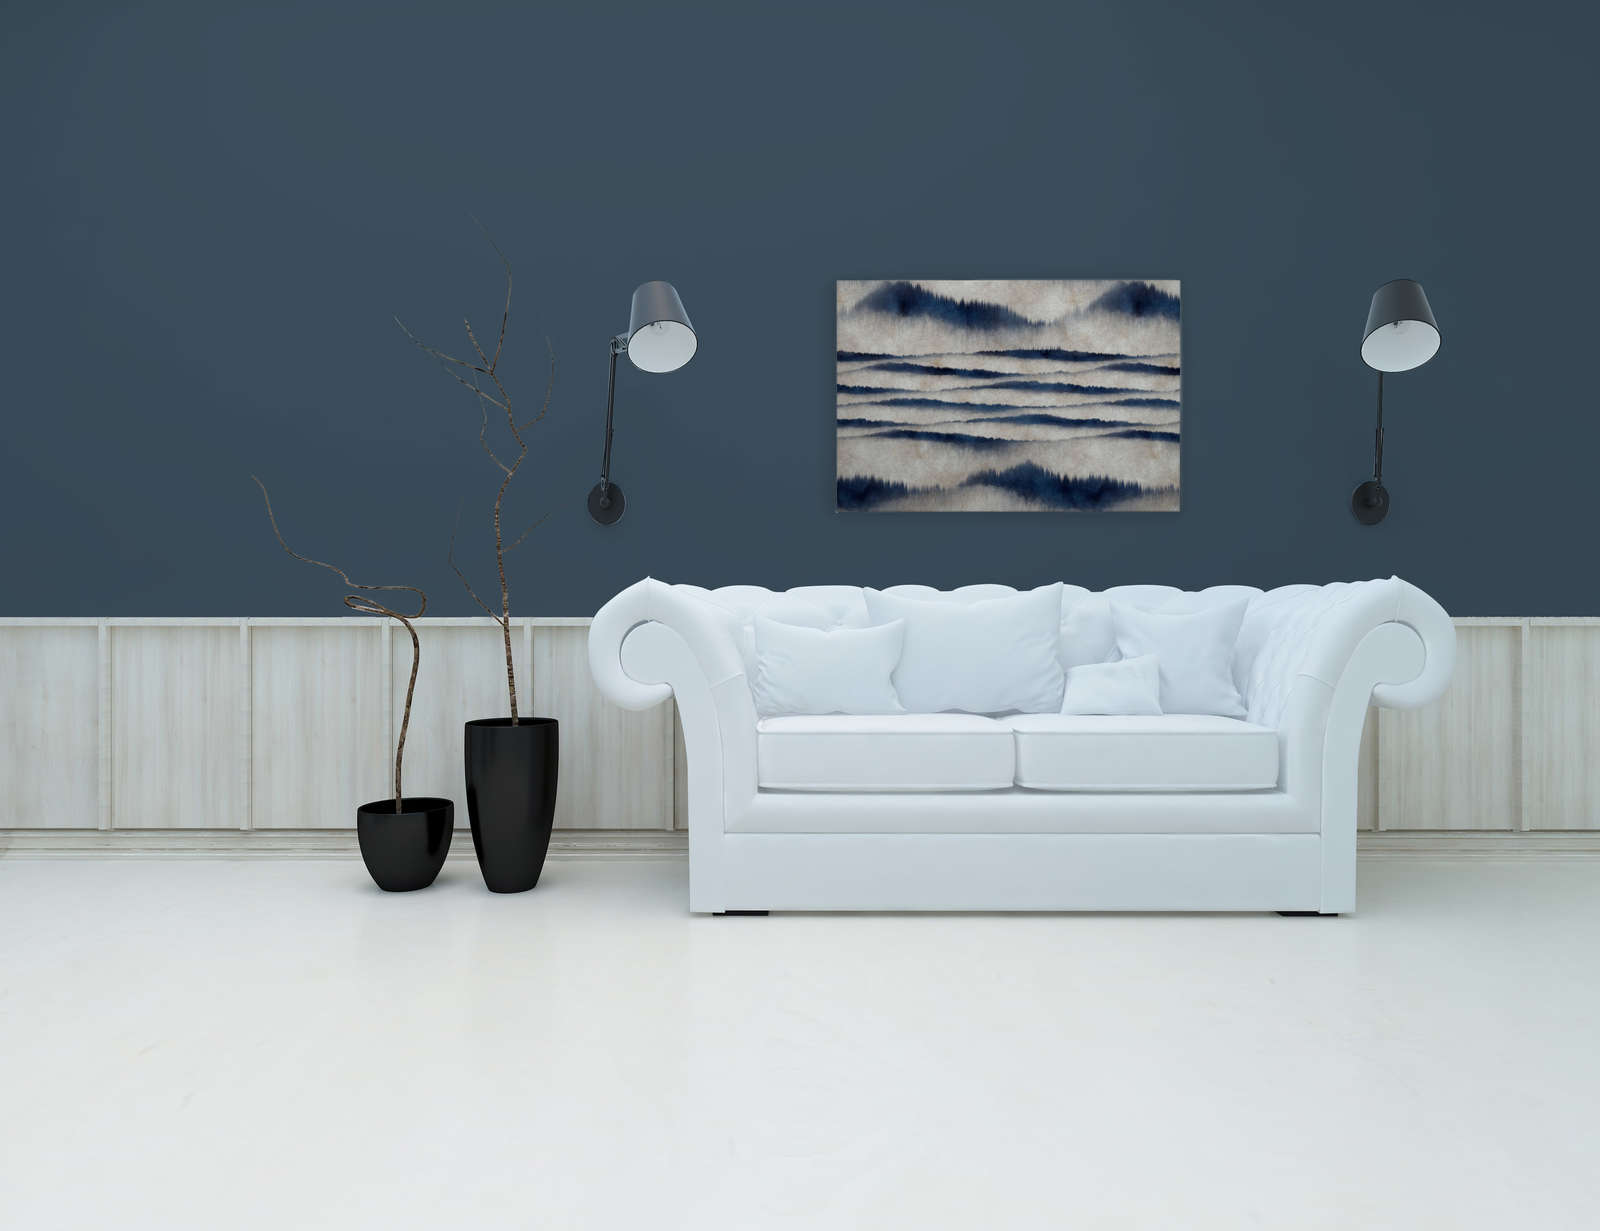             Canvas painting abstract pattern waves | blue, white - 0,90 m x 0,60 m
        